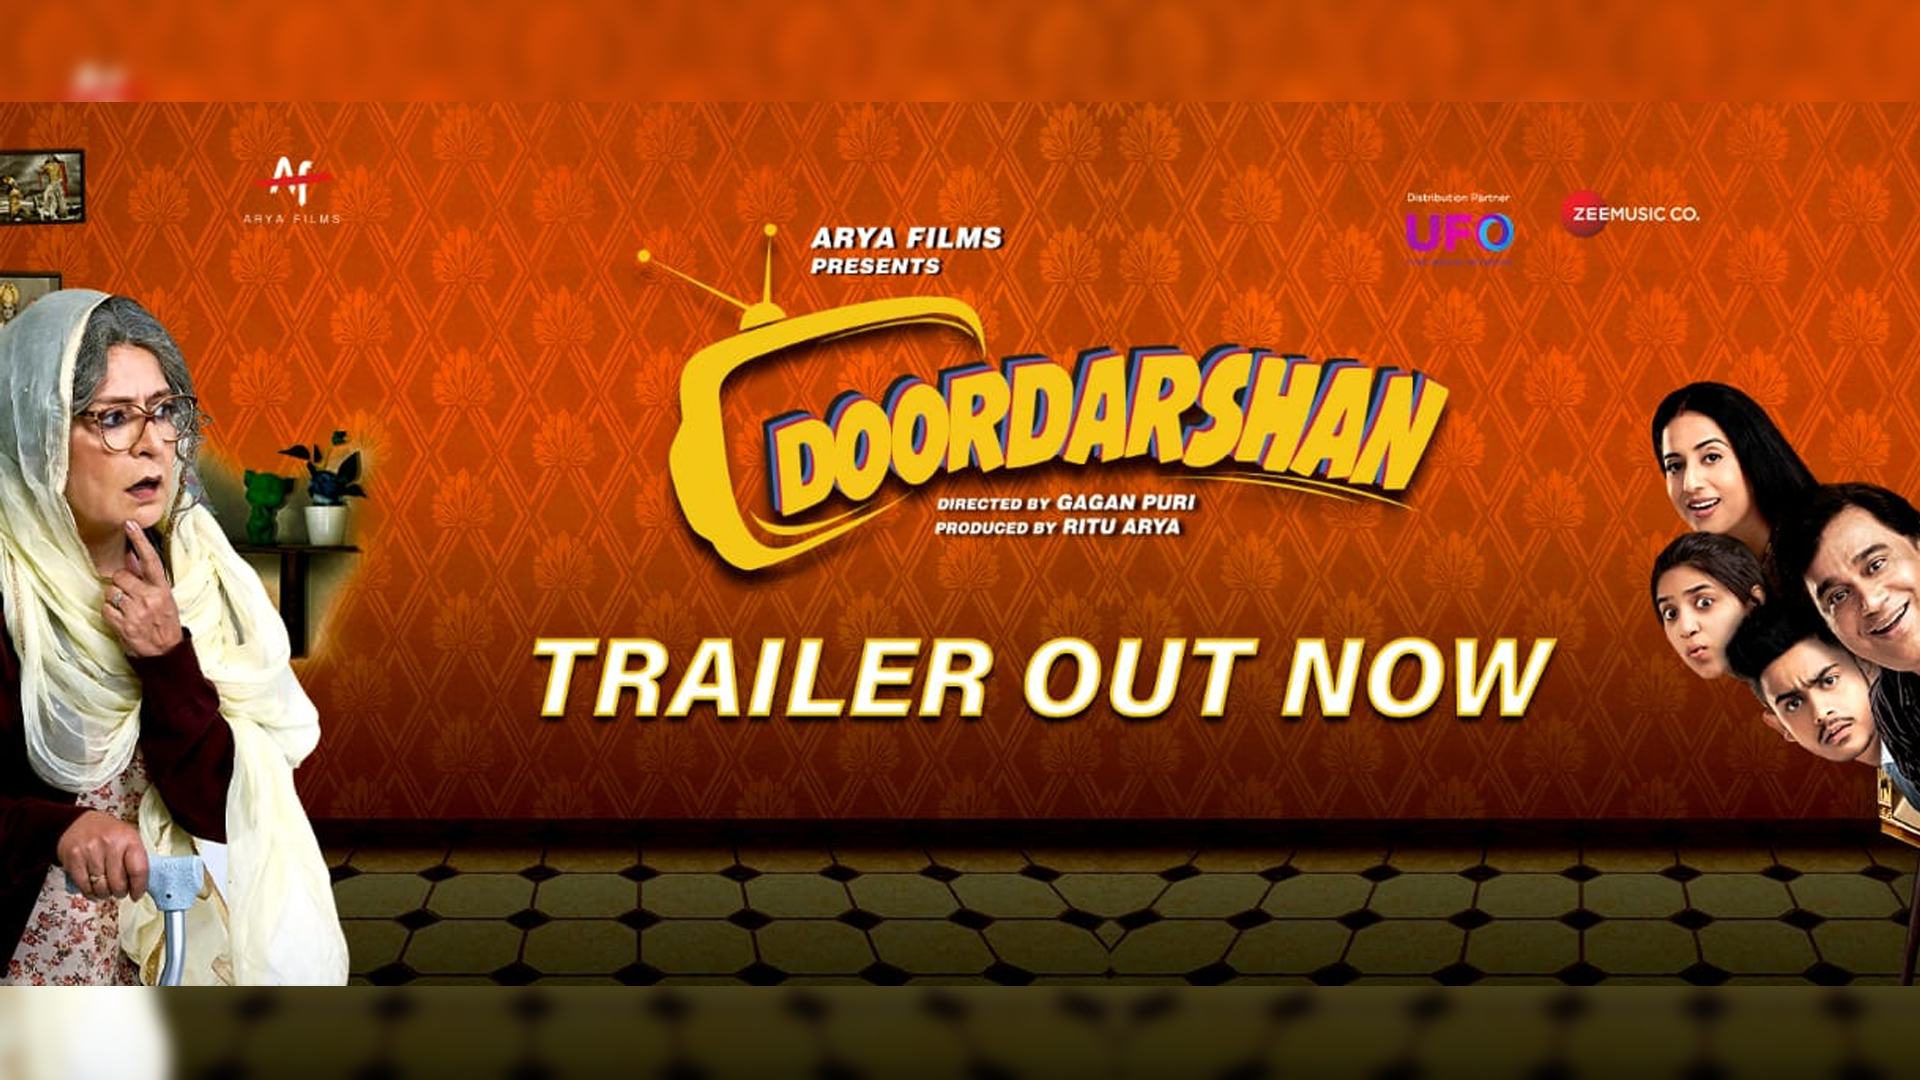 With a story of a family oscillating between 1989 and 2020, Doodarshan trailer promises a hilarious quirky ride